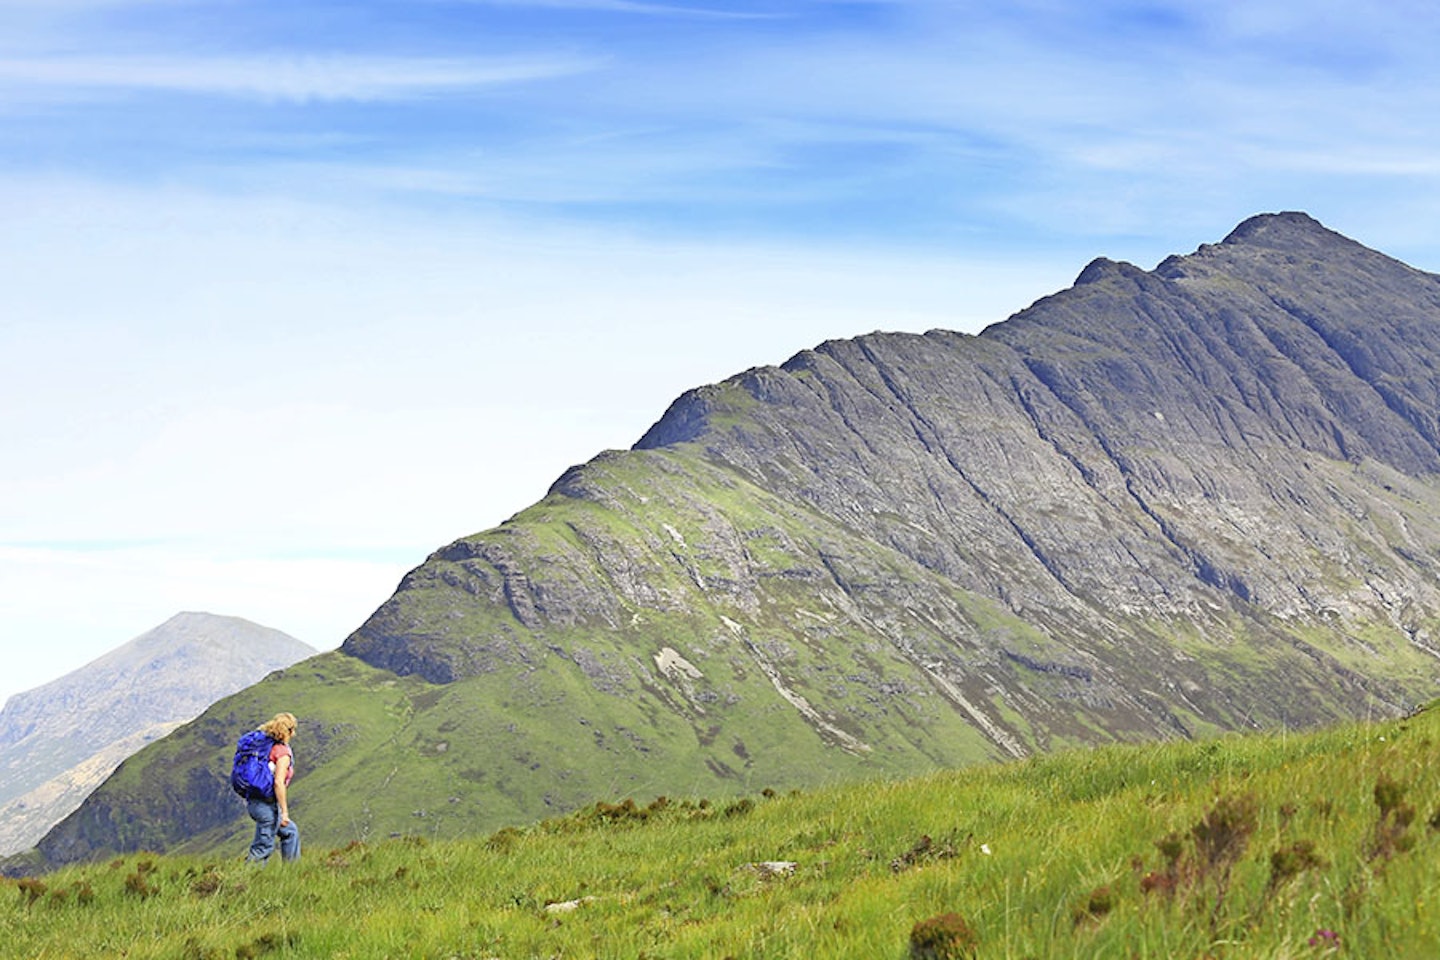 Sizing up the south ridge of Blabheinn, which provides one of the finest viewpoints of Skye’s Black Cuillin peaks.